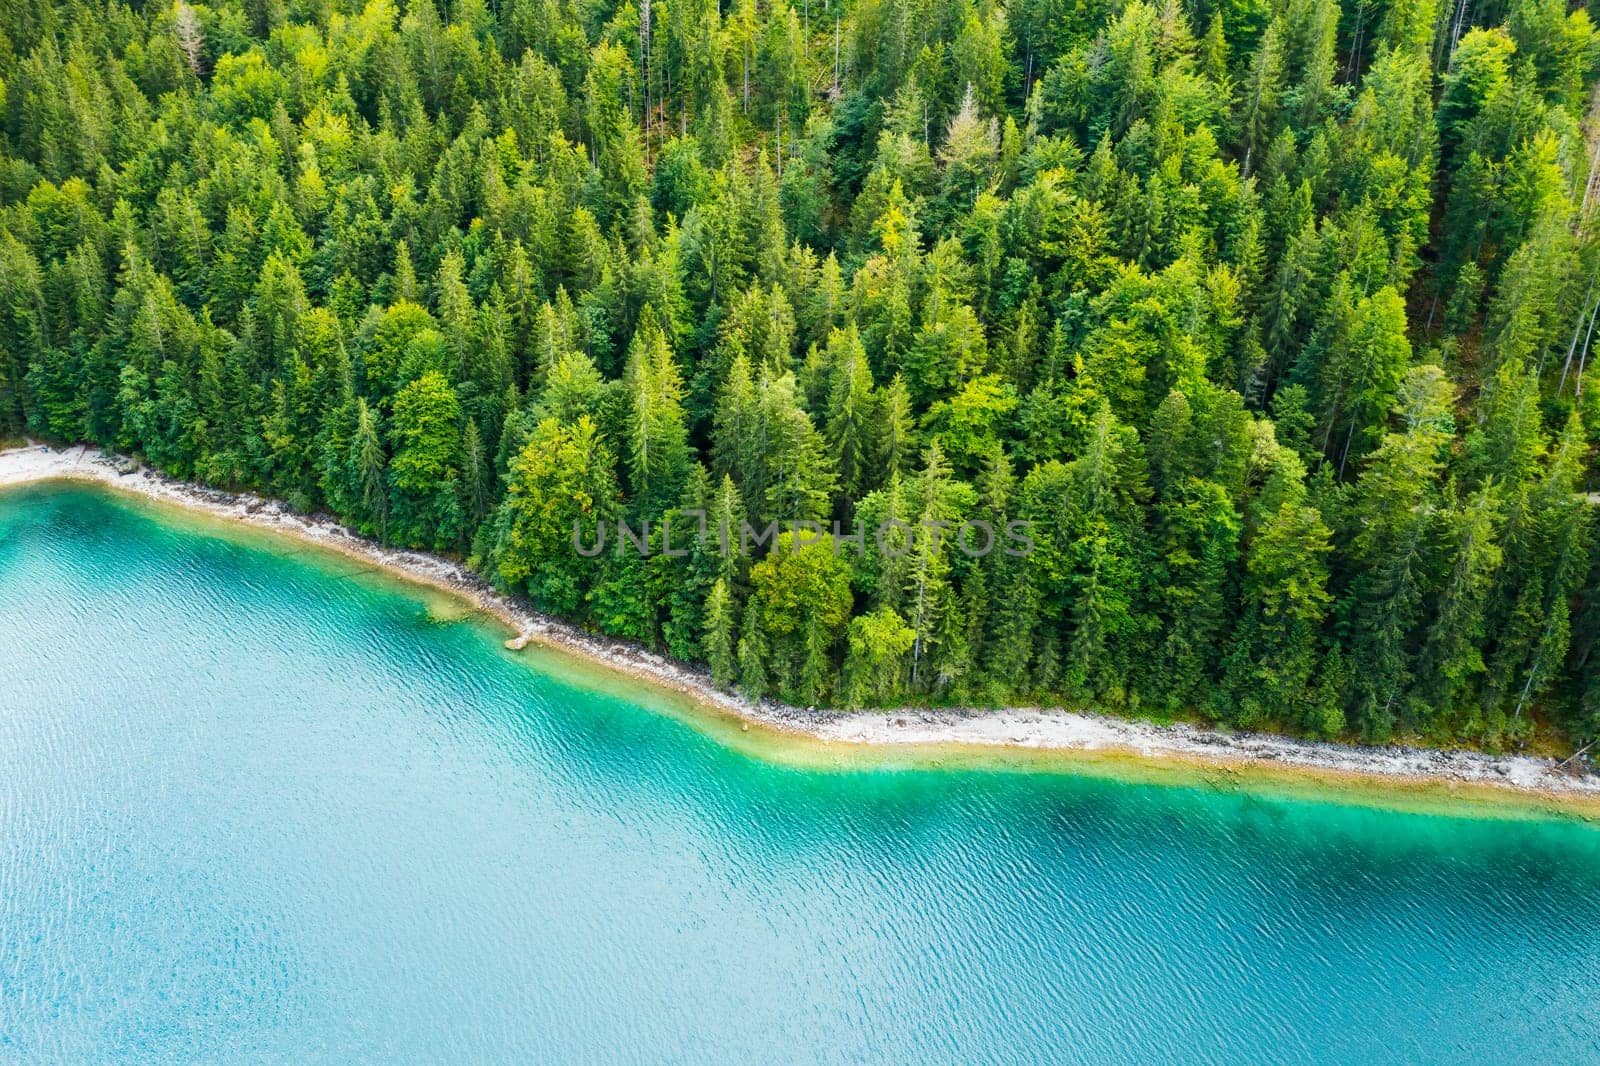 Riverside with tall pine trees and turquoise water, aerial view.